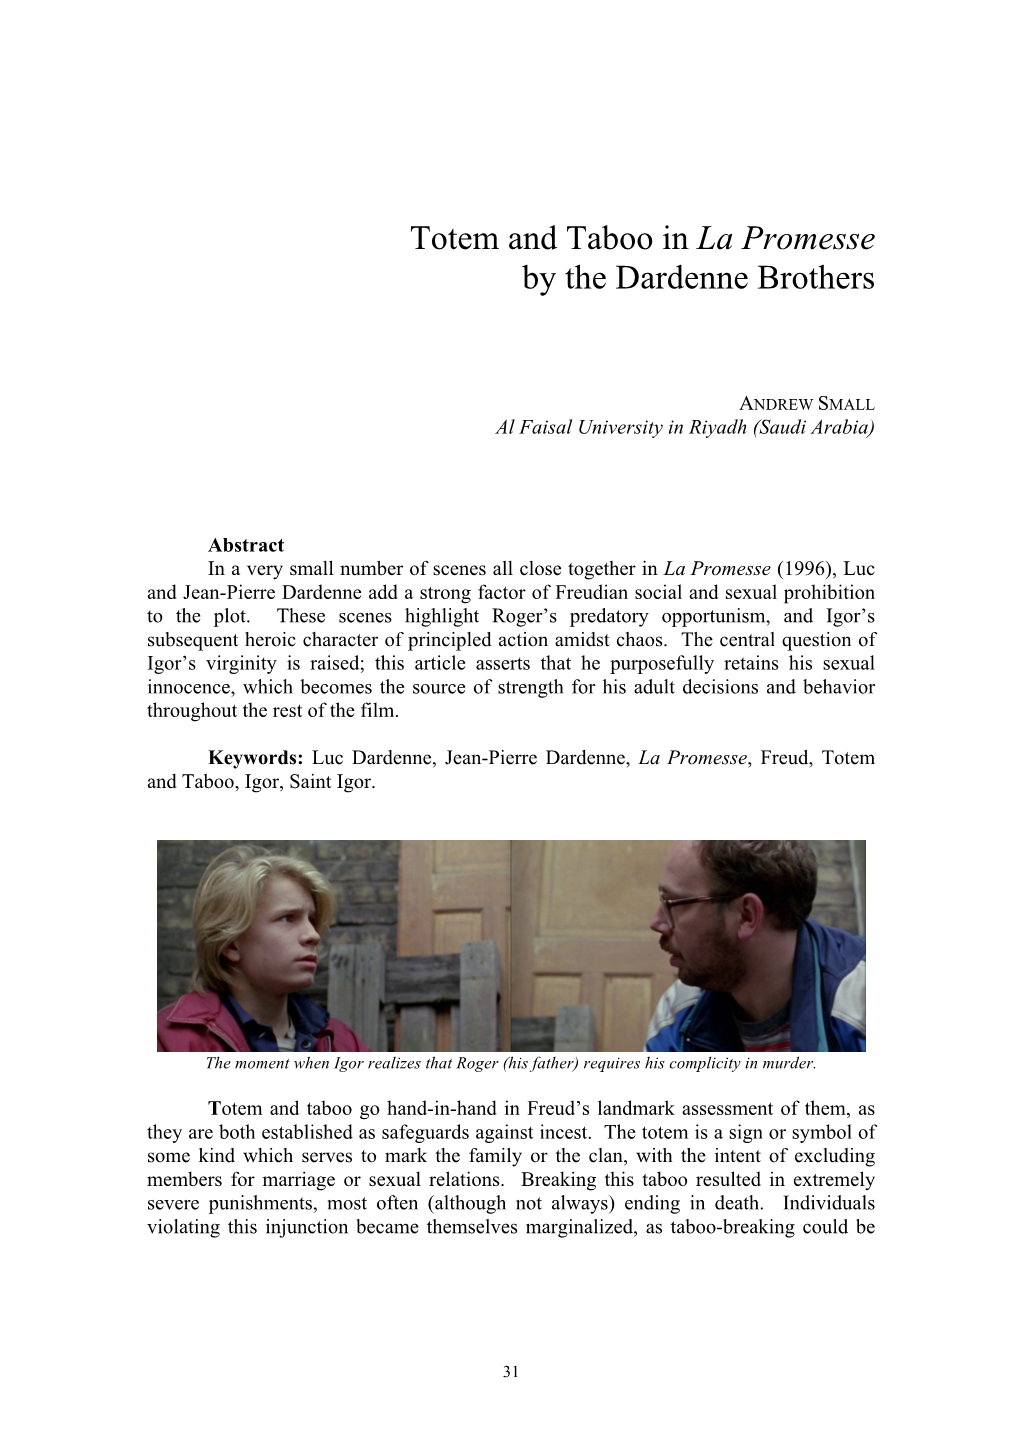 Totem and Taboo in La Promesse by the Dardenne Brothers